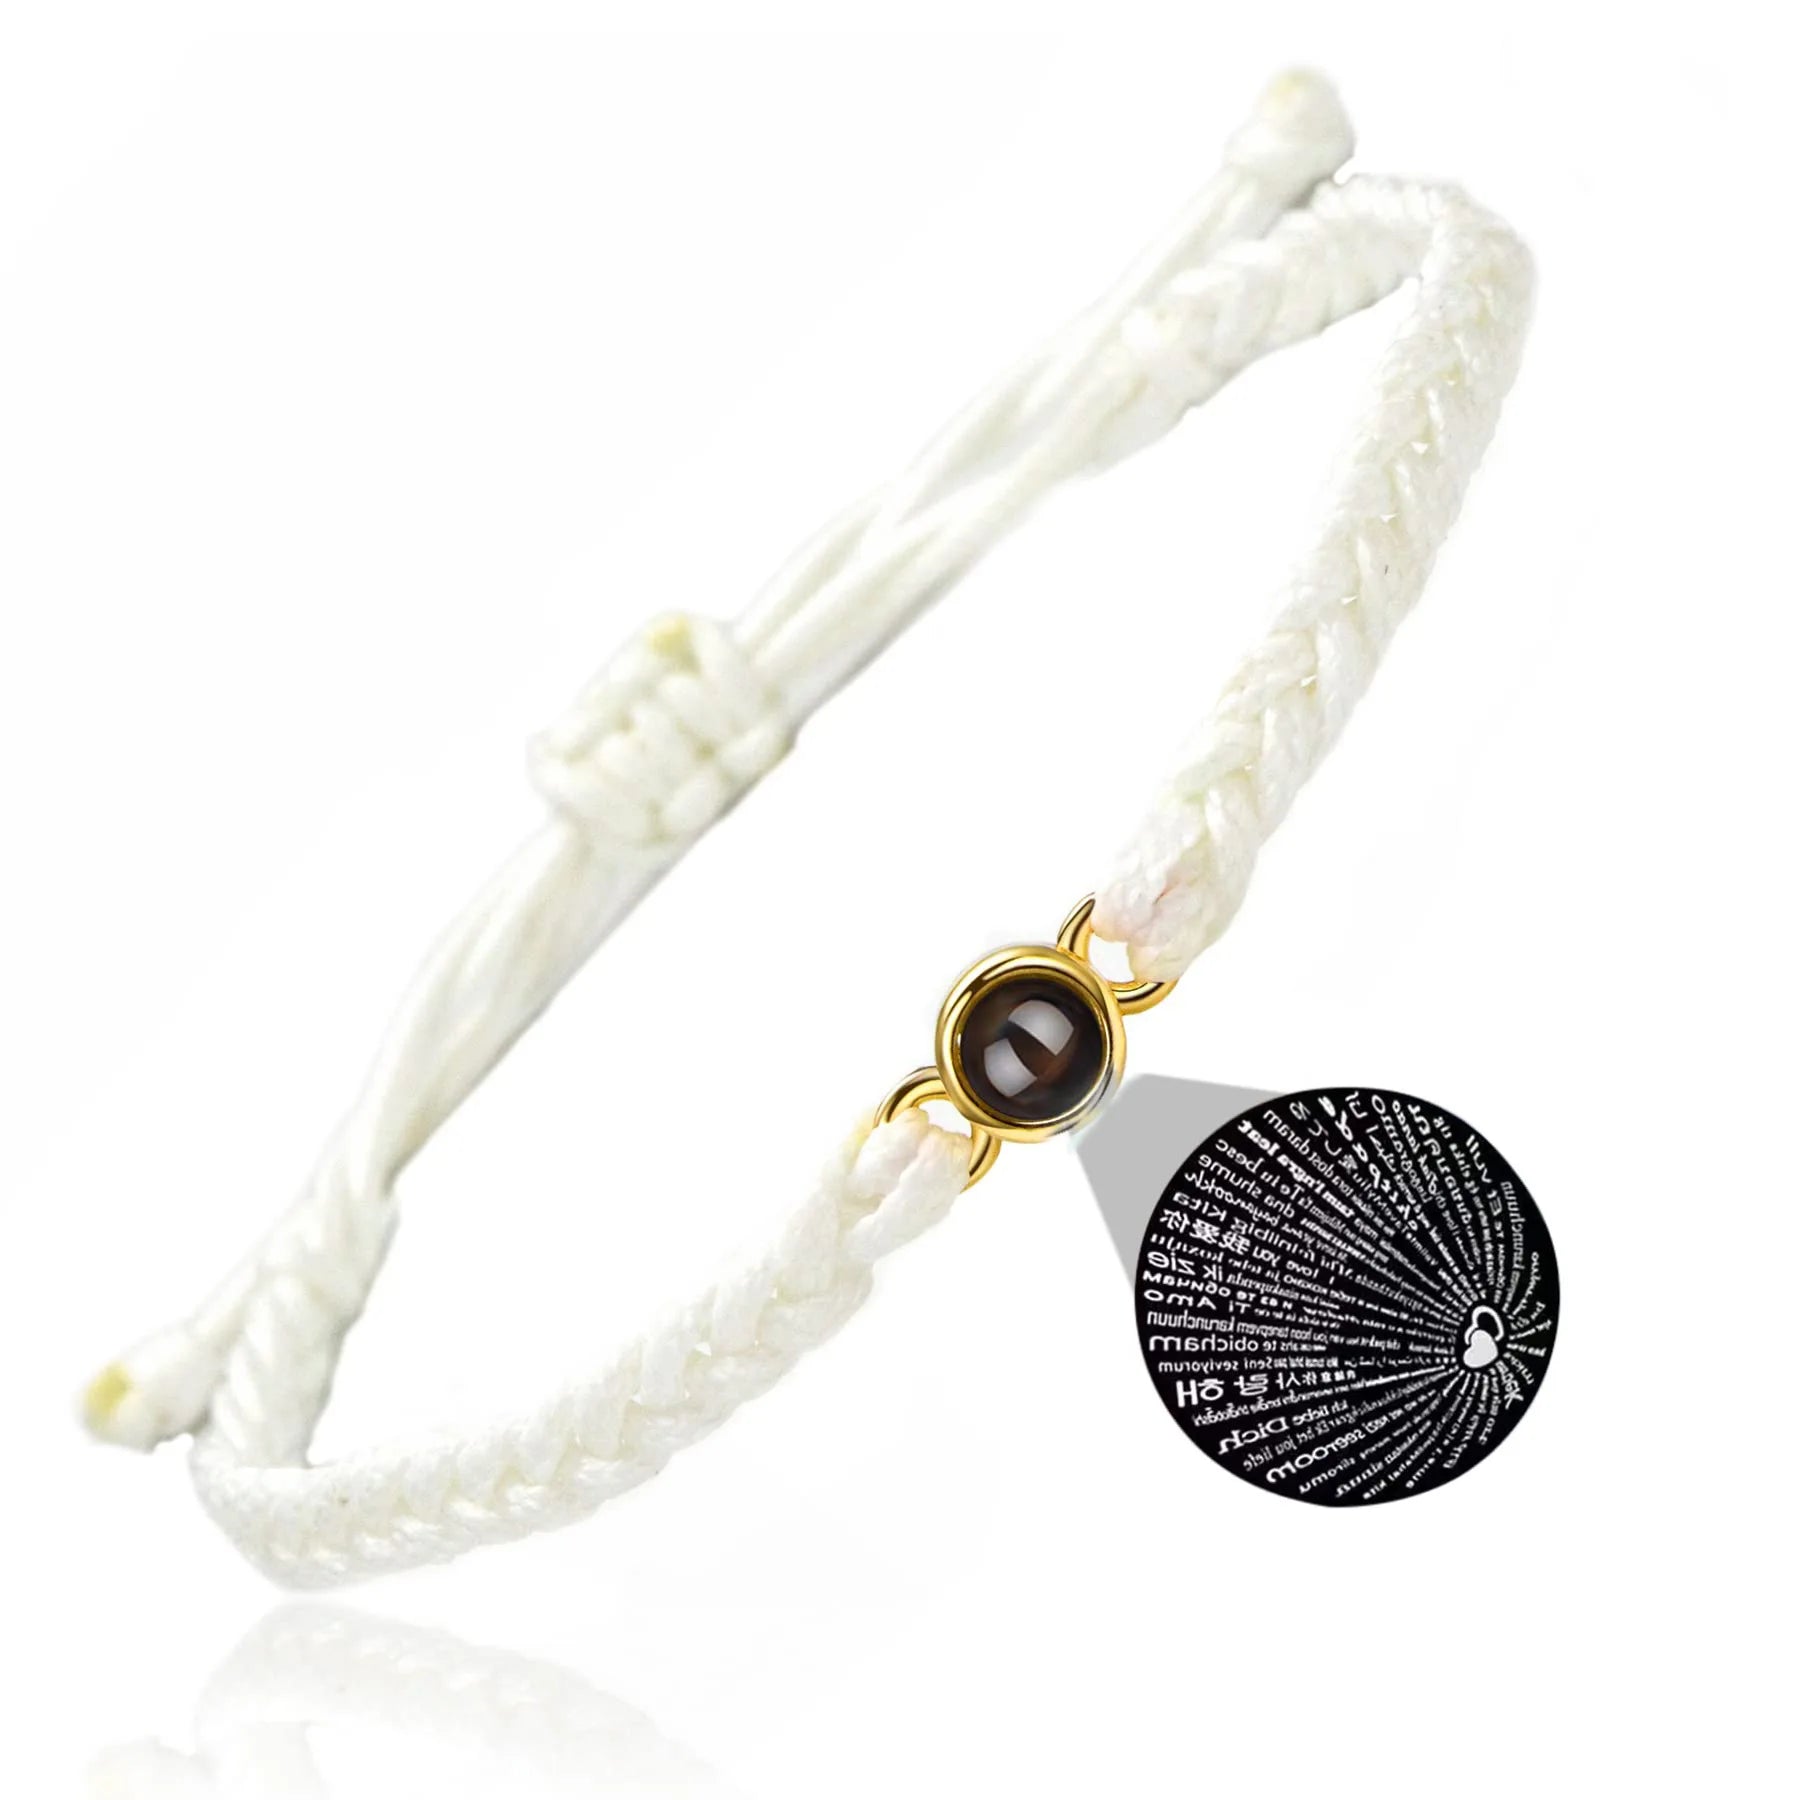 Projection Jewelry Classic Hand-Woven Ropes Custom Bracelets With Personalized Photos Suitable For Holiday Commemorative Gifts White plus rose gold - IHavePaws